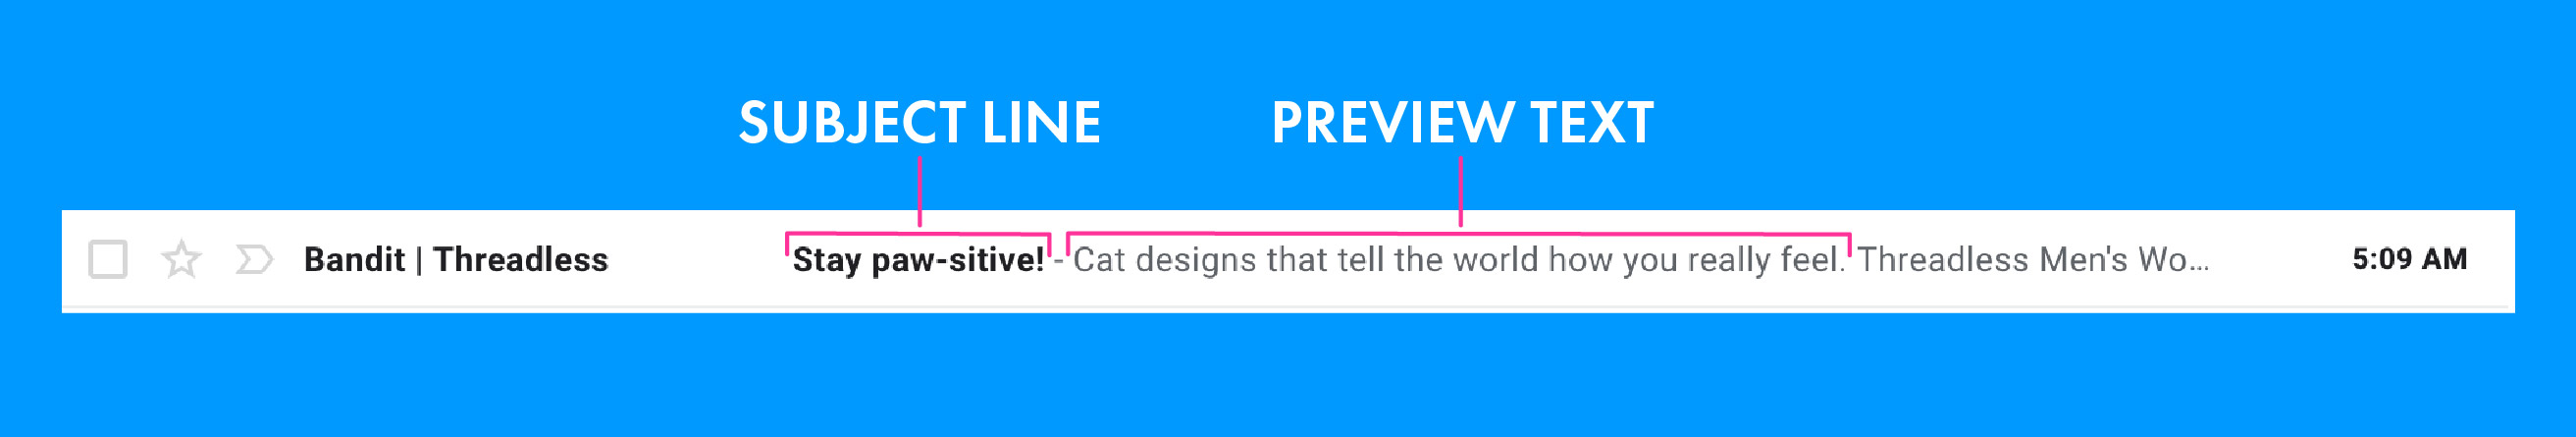 Write a subject line and preview text